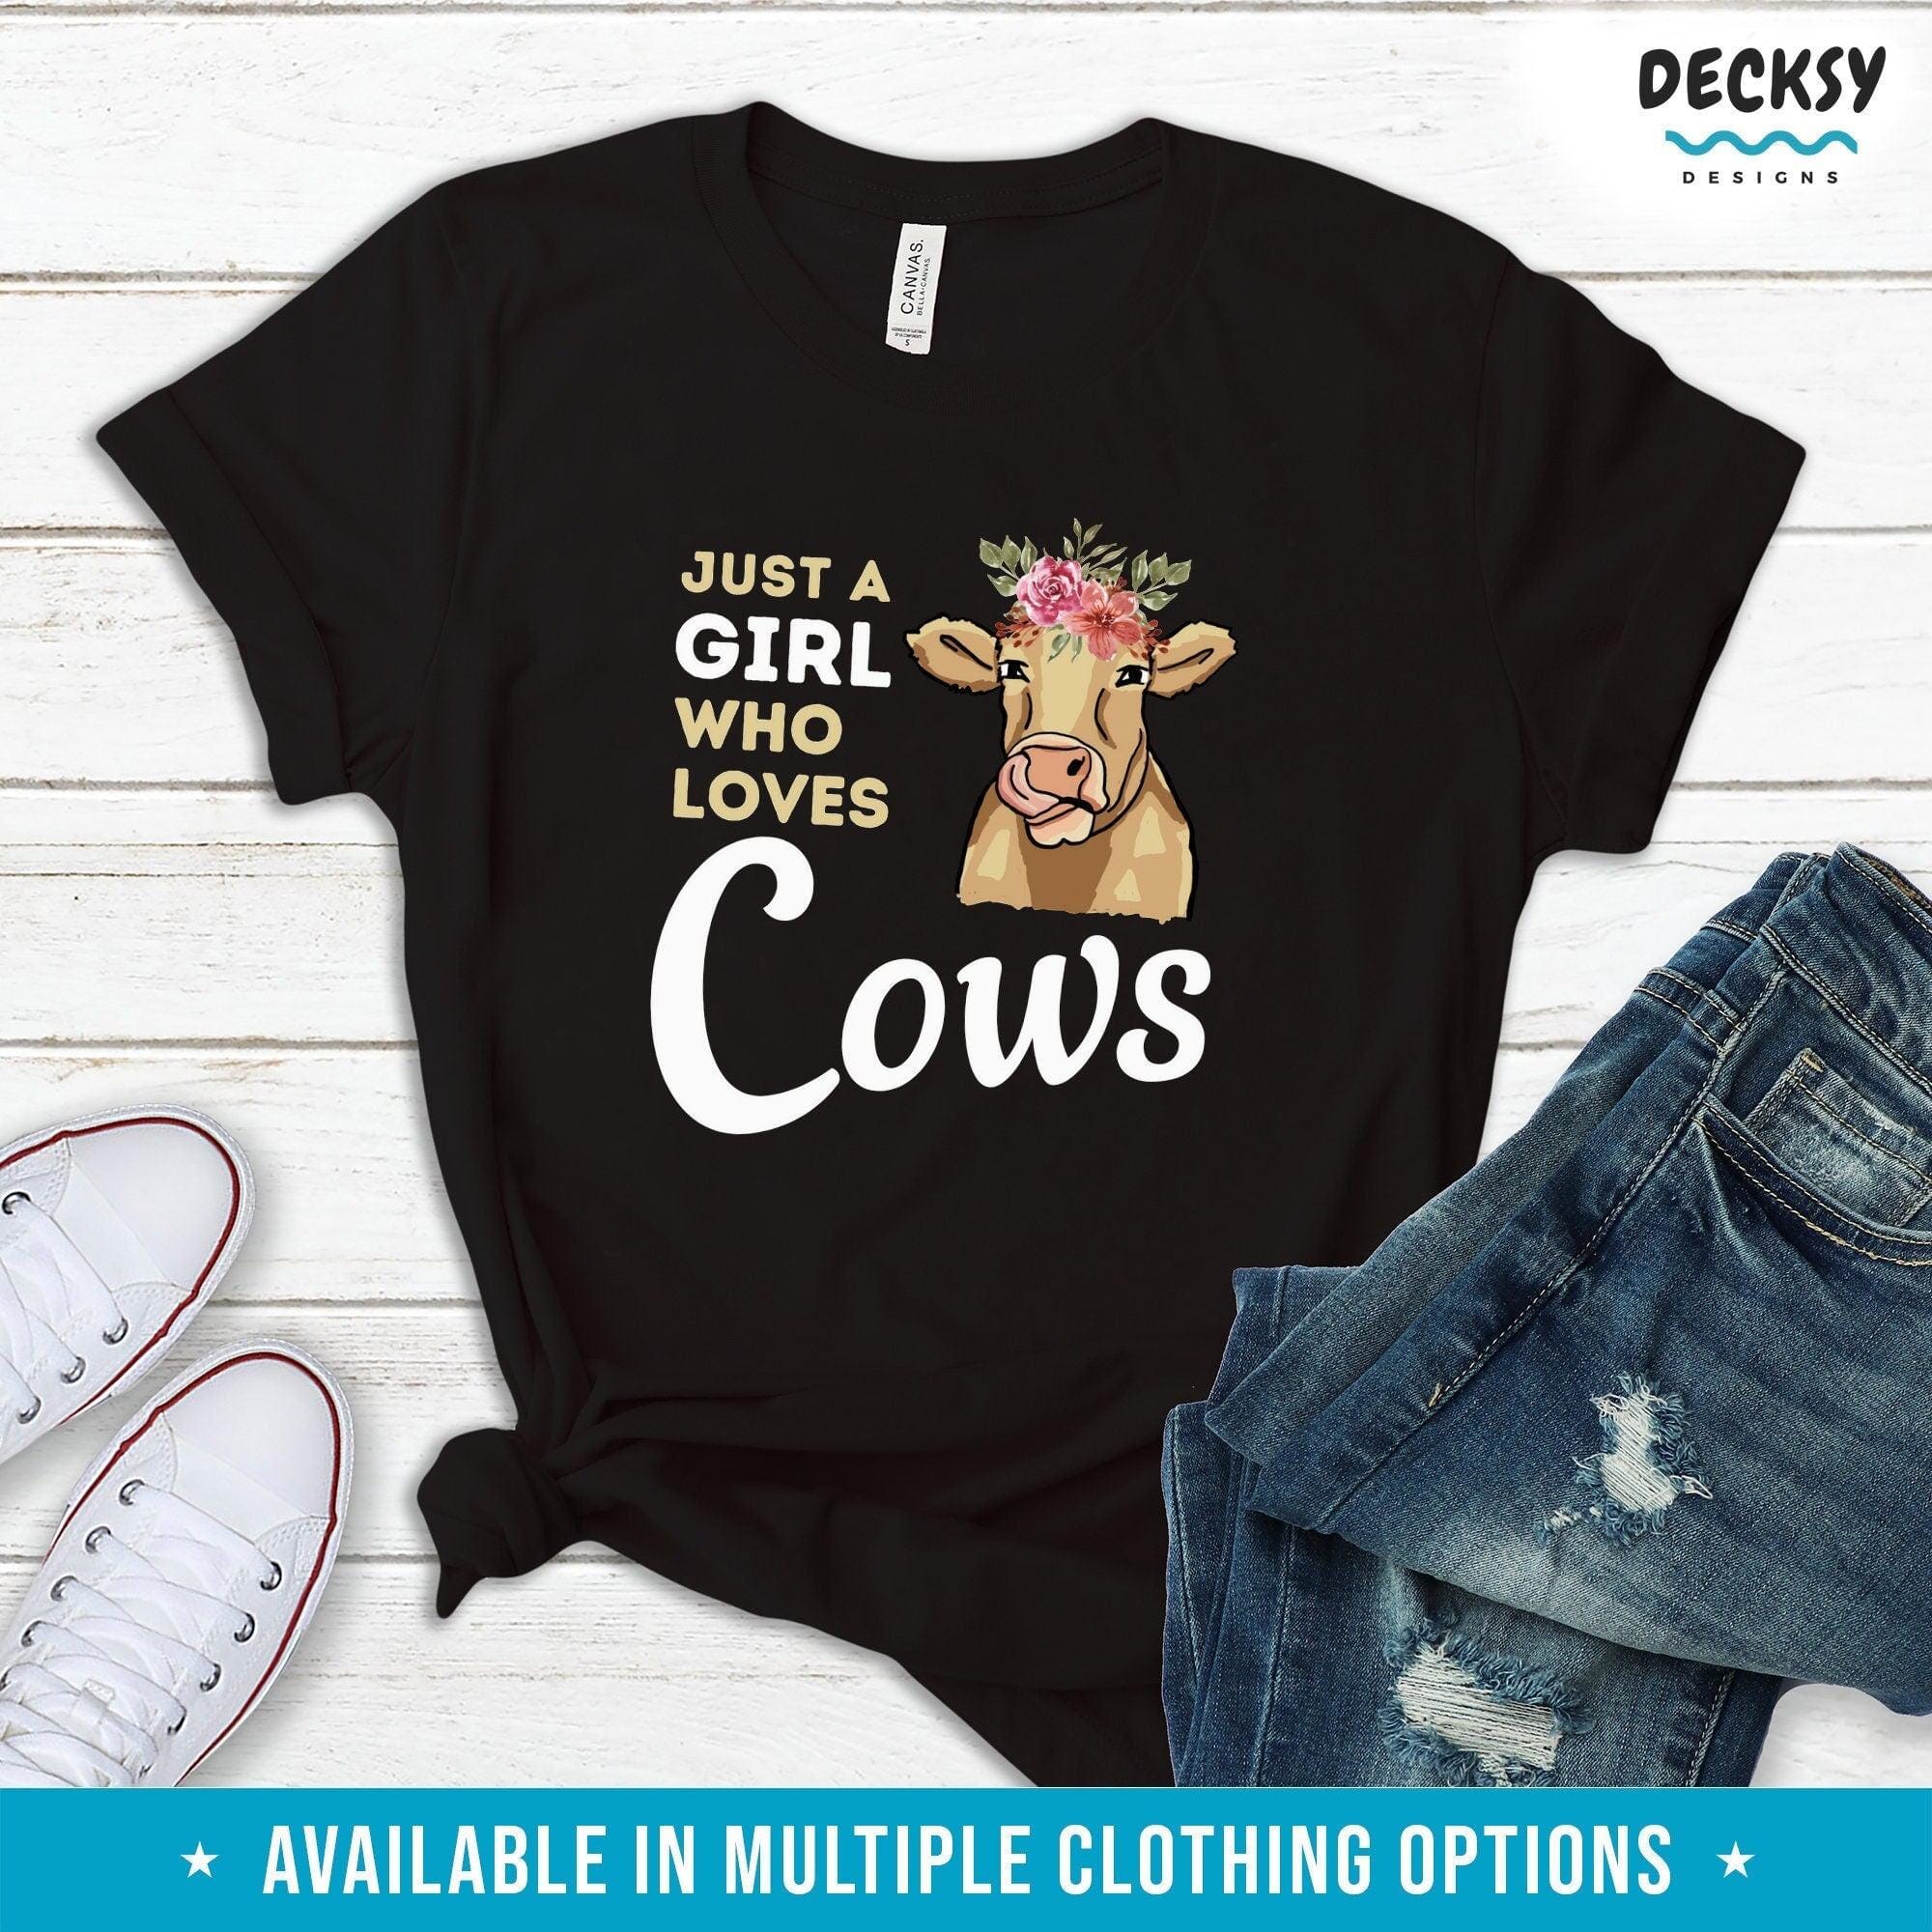 Cow Shirt, Gift For Farm Animal Lover-Clothing:Gender-Neutral Adult Clothing:Tops & Tees:T-shirts:Graphic Tees-DecksyDesigns